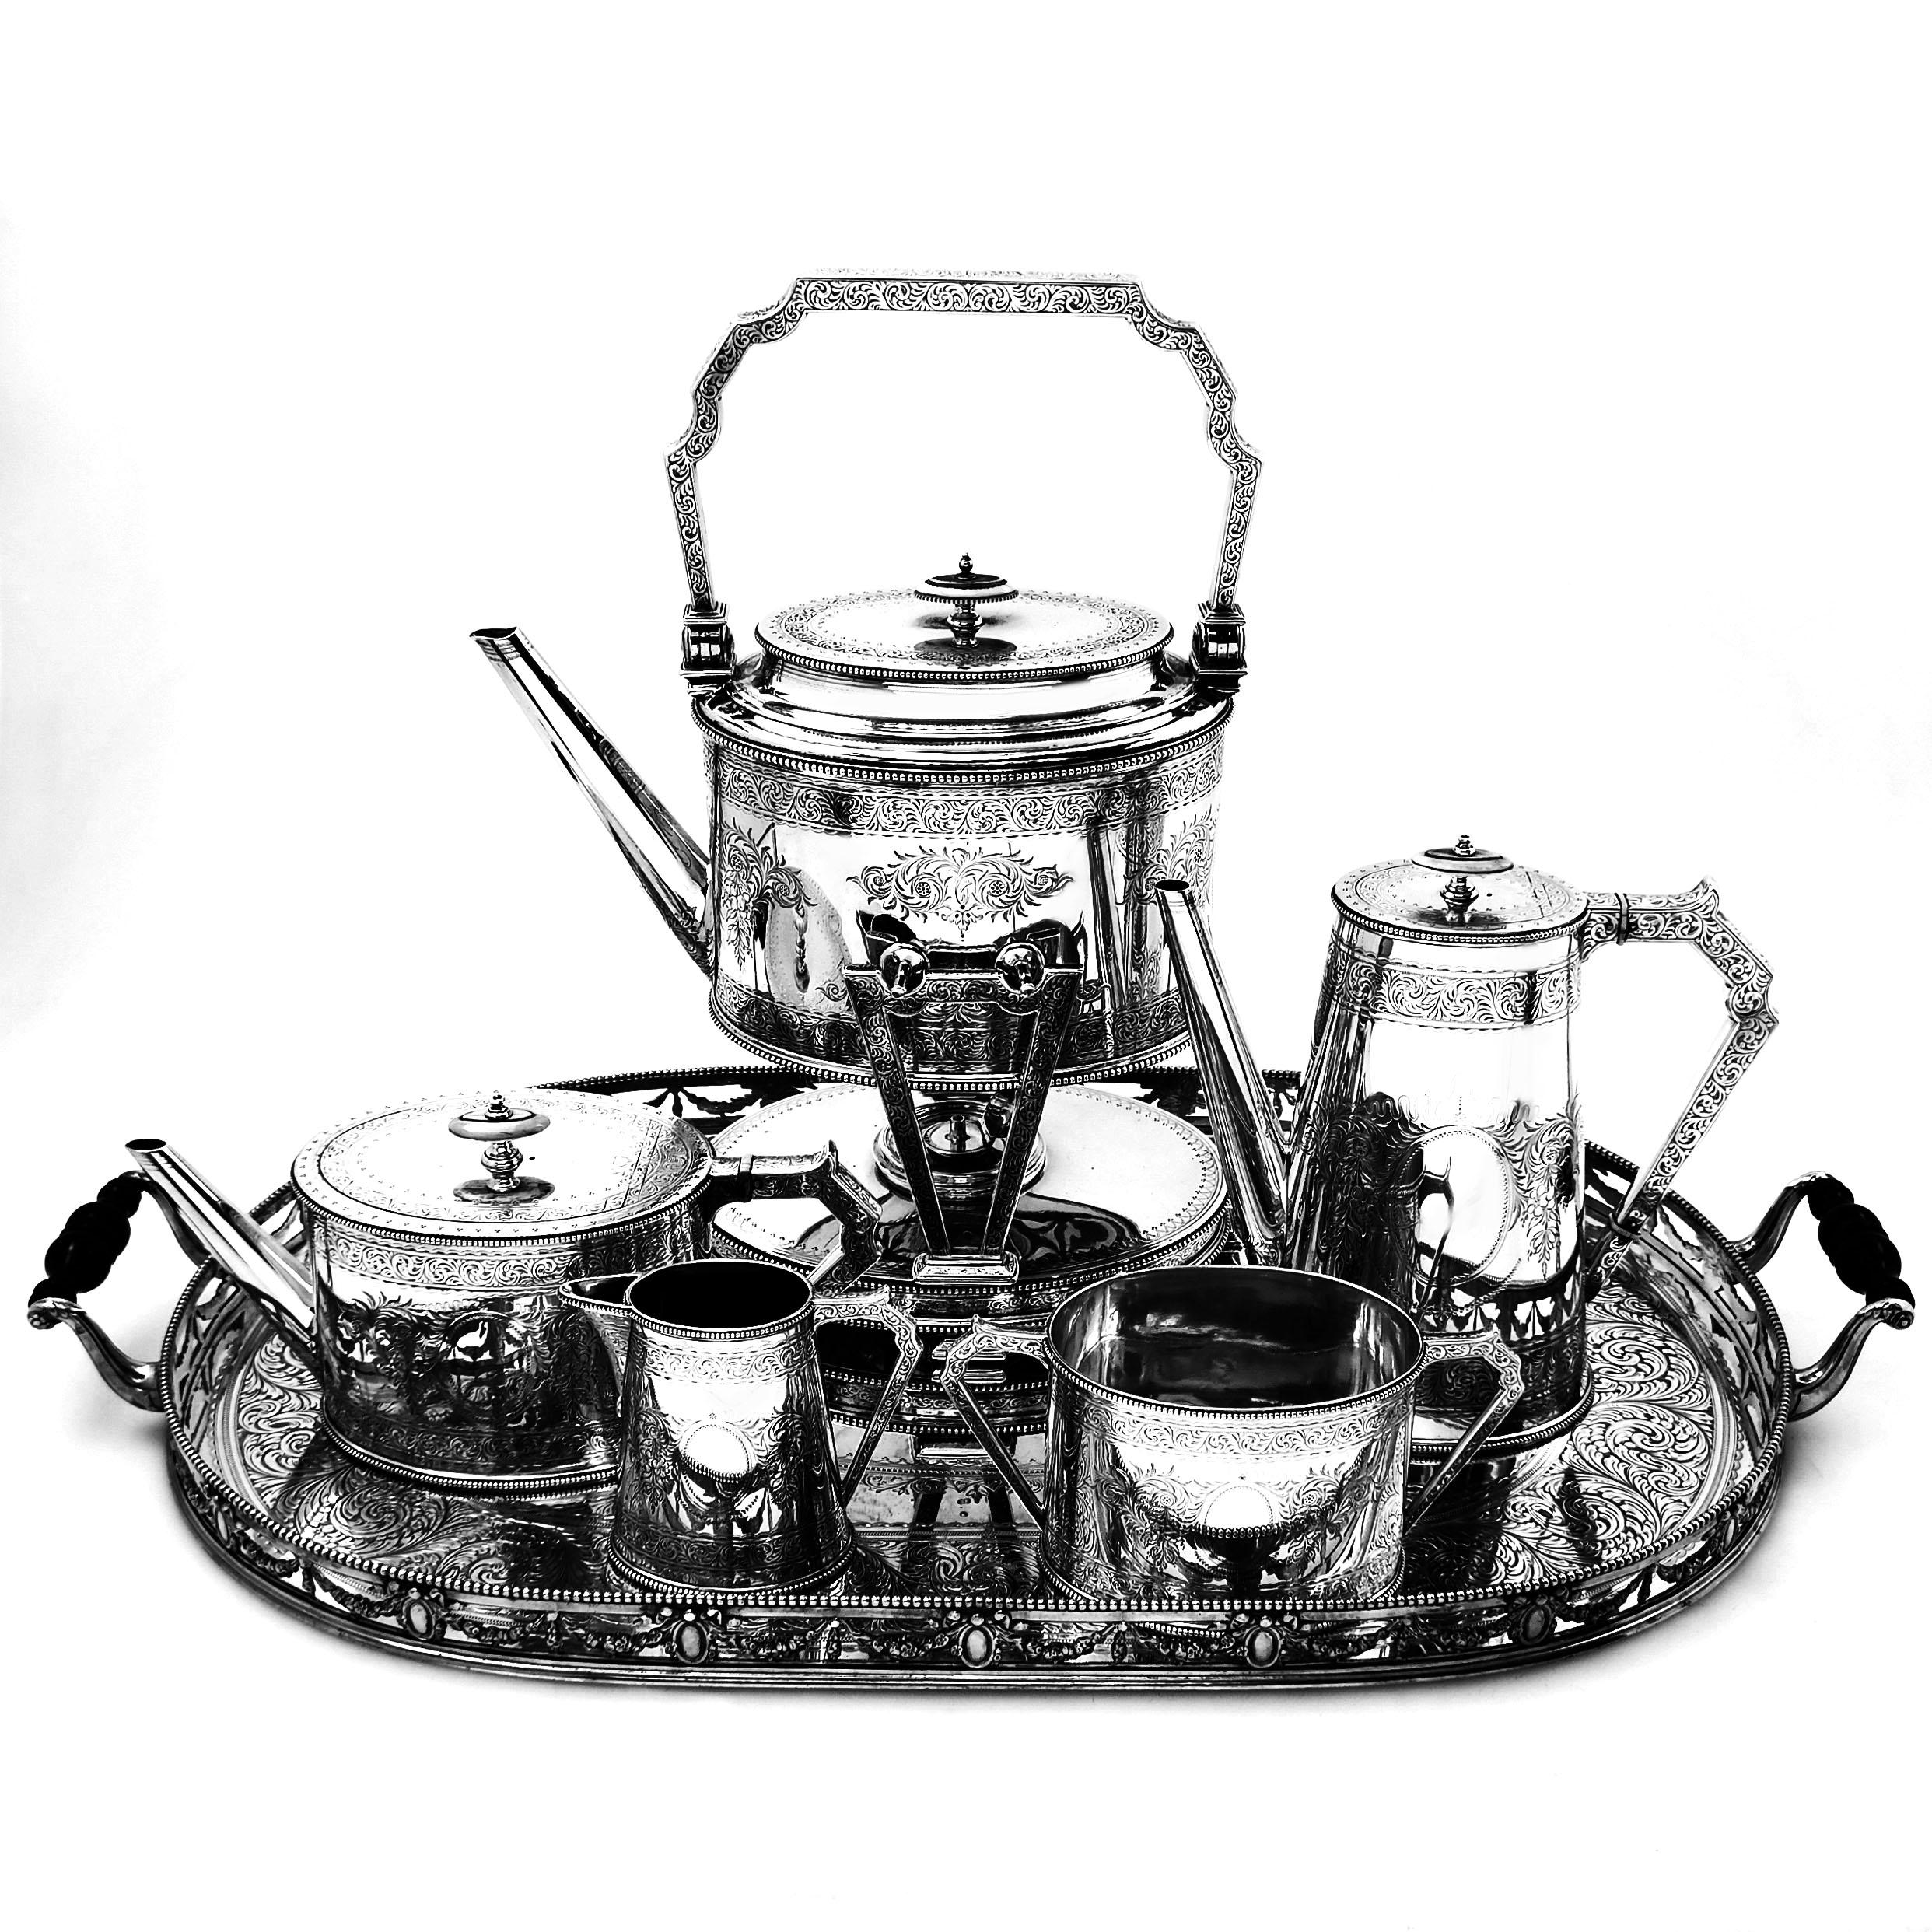 A magnificent Antique Victorian Sterling Silver Tea and Coffee Set on an impressive matching Tray. The Set comprises of a tea pot, coffee pot, hot water kettle on stand with original burner, a milk / cream jug, sugar bowl and large serving tray. The